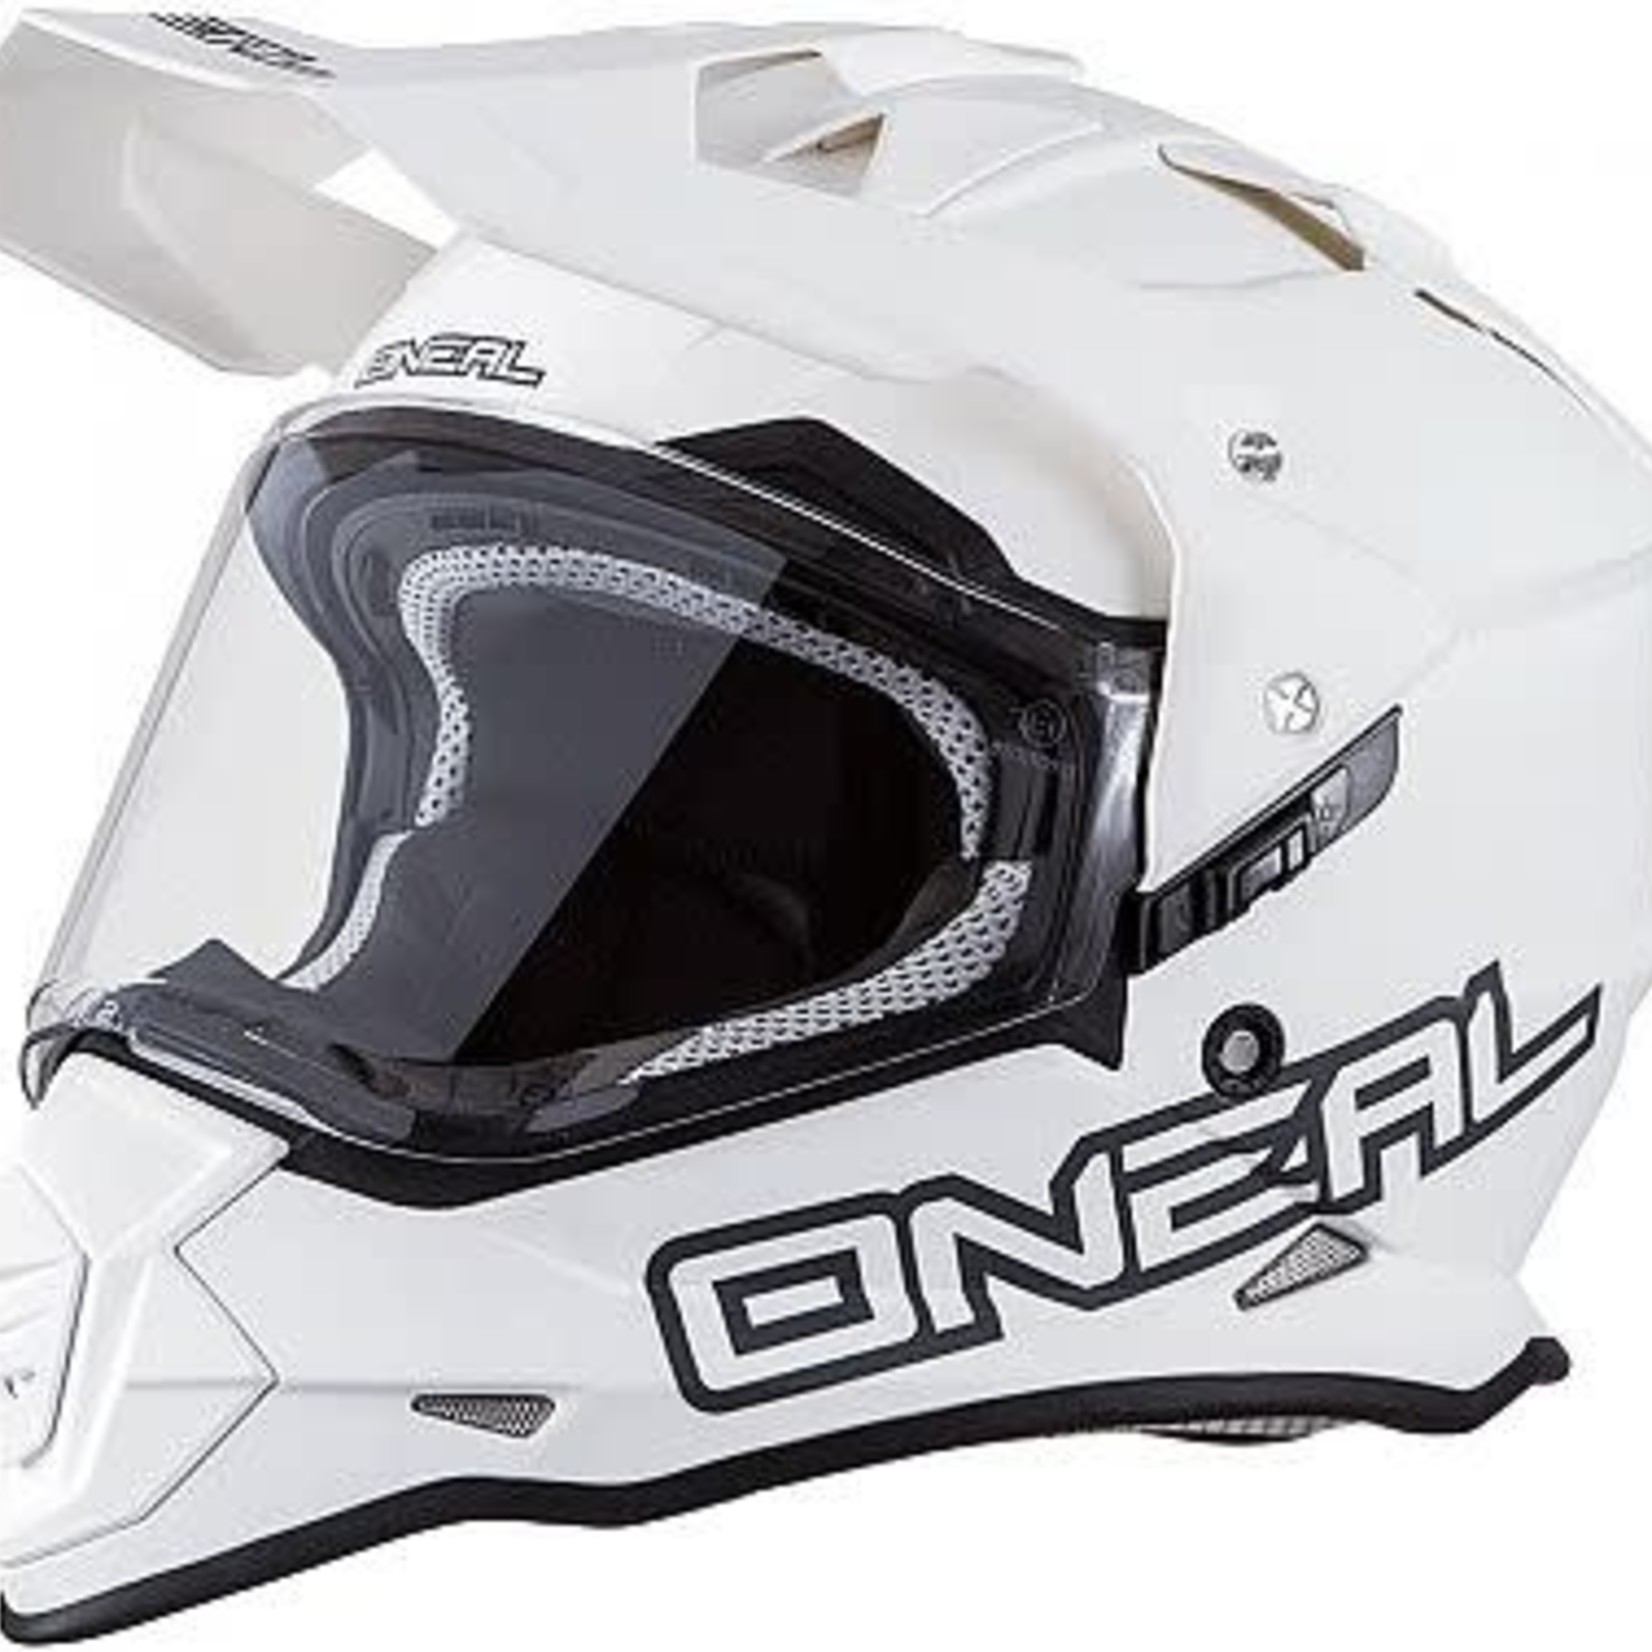 Oneal Oneal casque Sierra blanche